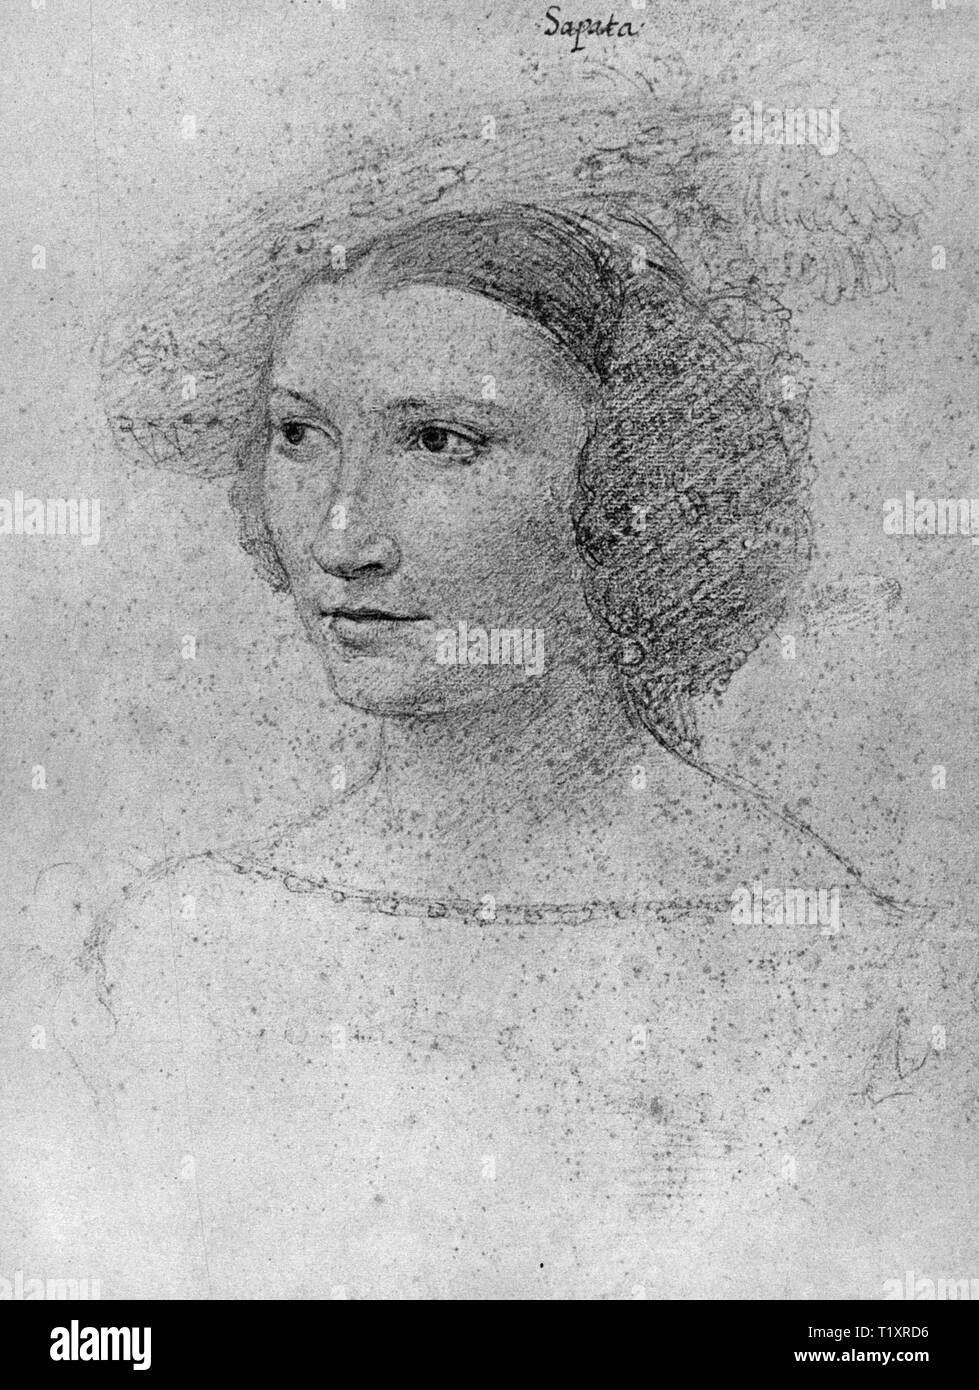 Bildende Kunst, Jean Clouet (1480-1541), Zeichnung, Dona Leonora de Sapata, Porträt, 1531, Additional-Rights - Clearance-Info - Not-Available Stockfoto